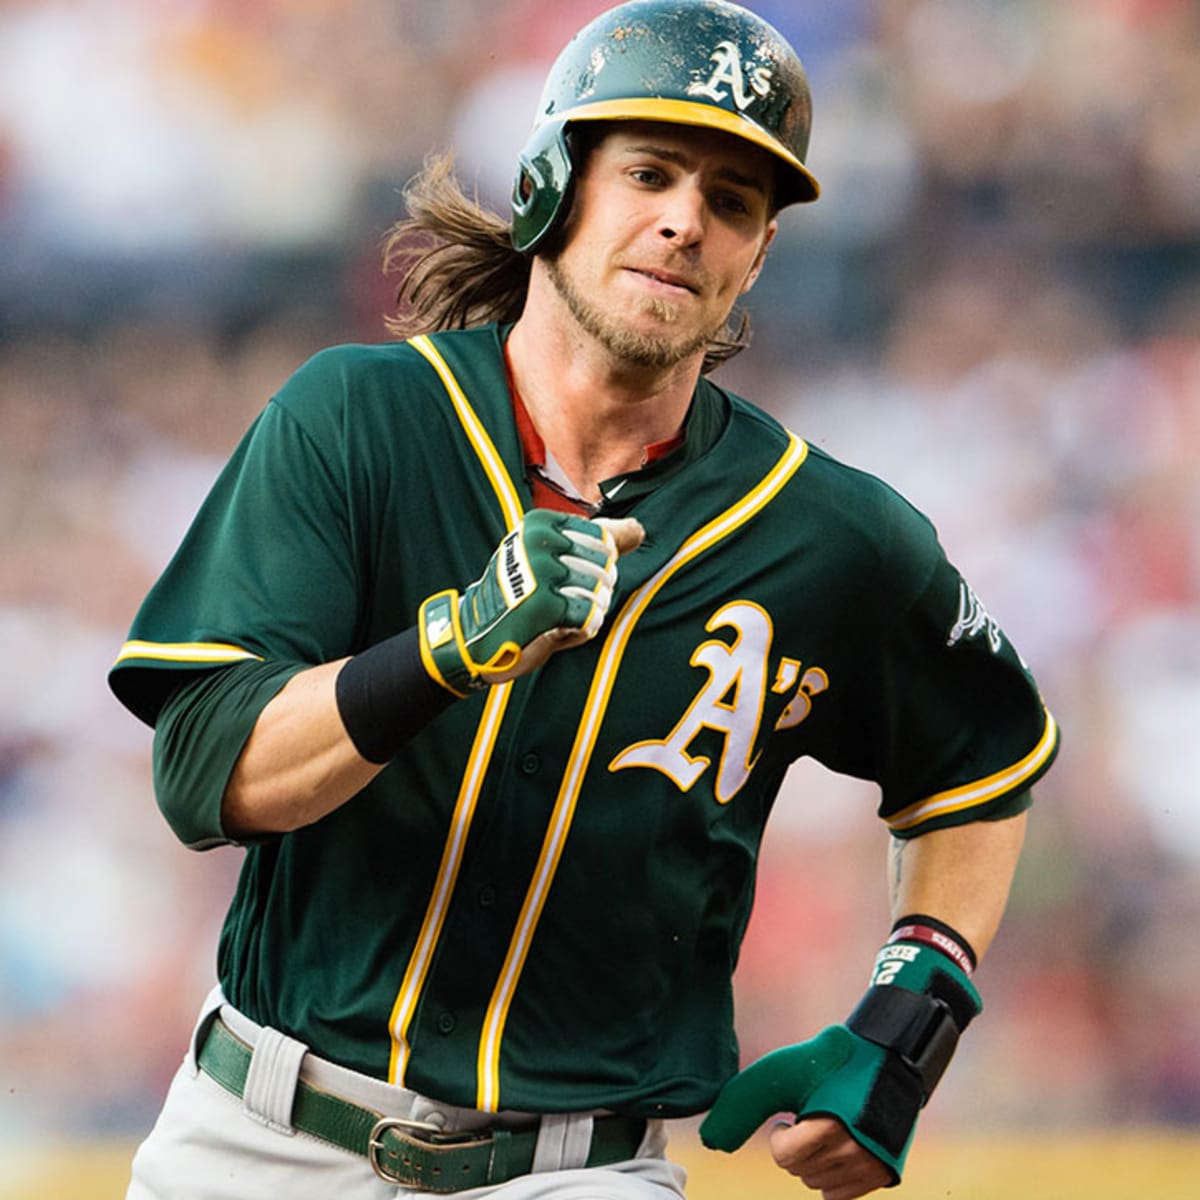 Dodgers: Former LA Outfielder Josh Reddick Heads Out of the